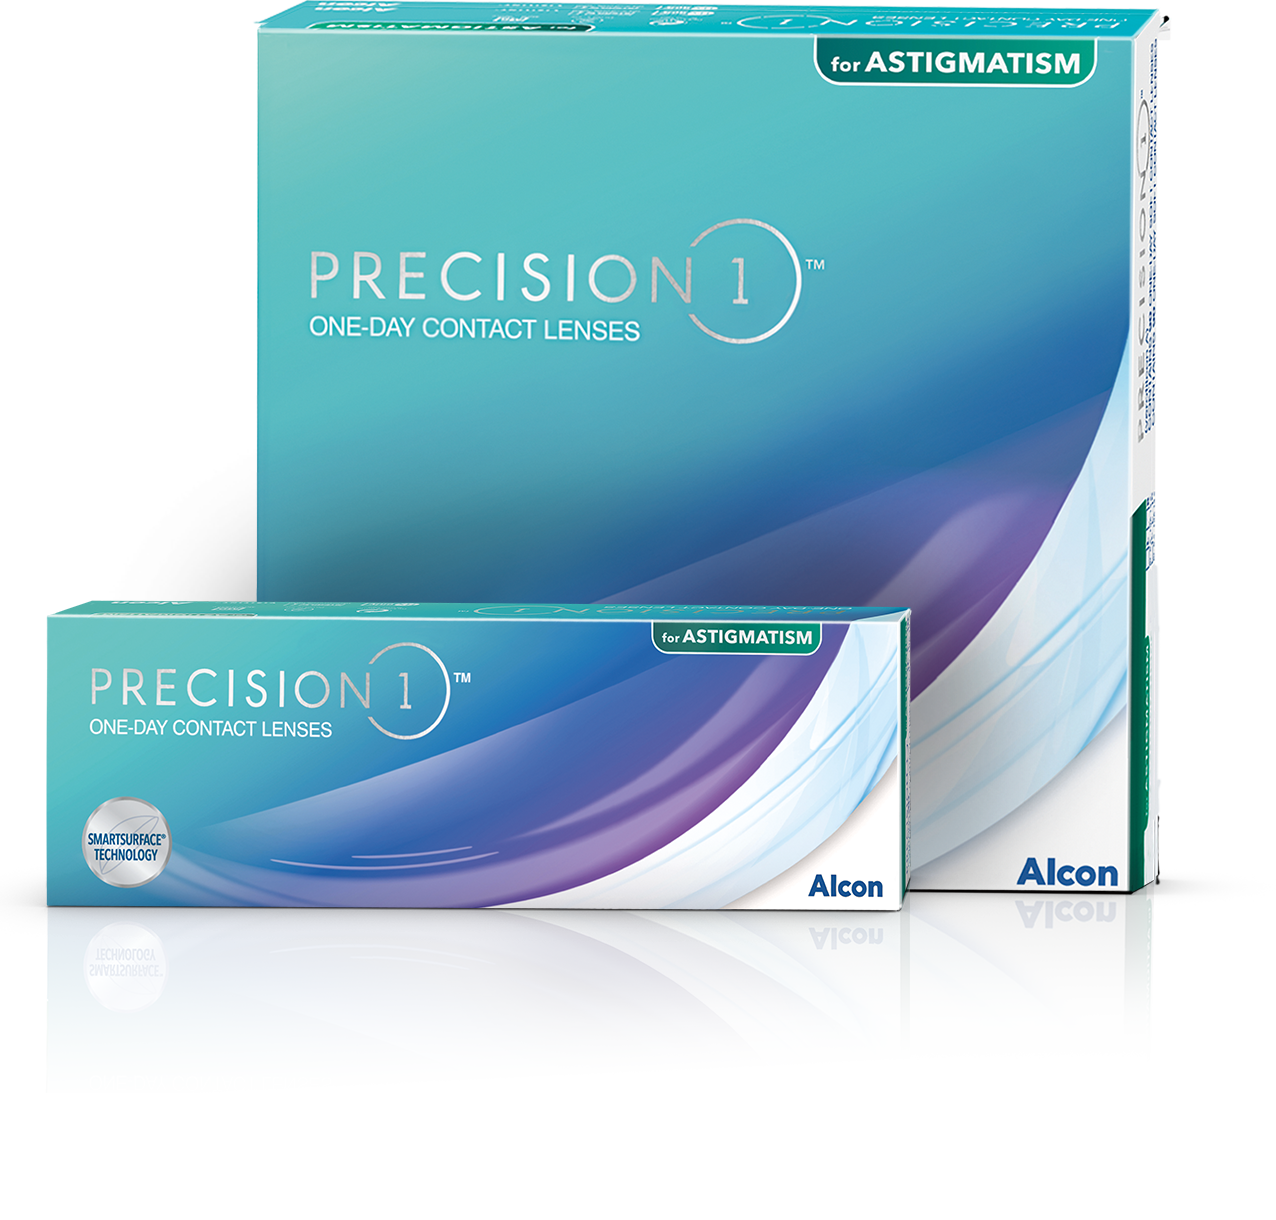 Precision1 for Astigmatism daily contact lenses product boxes